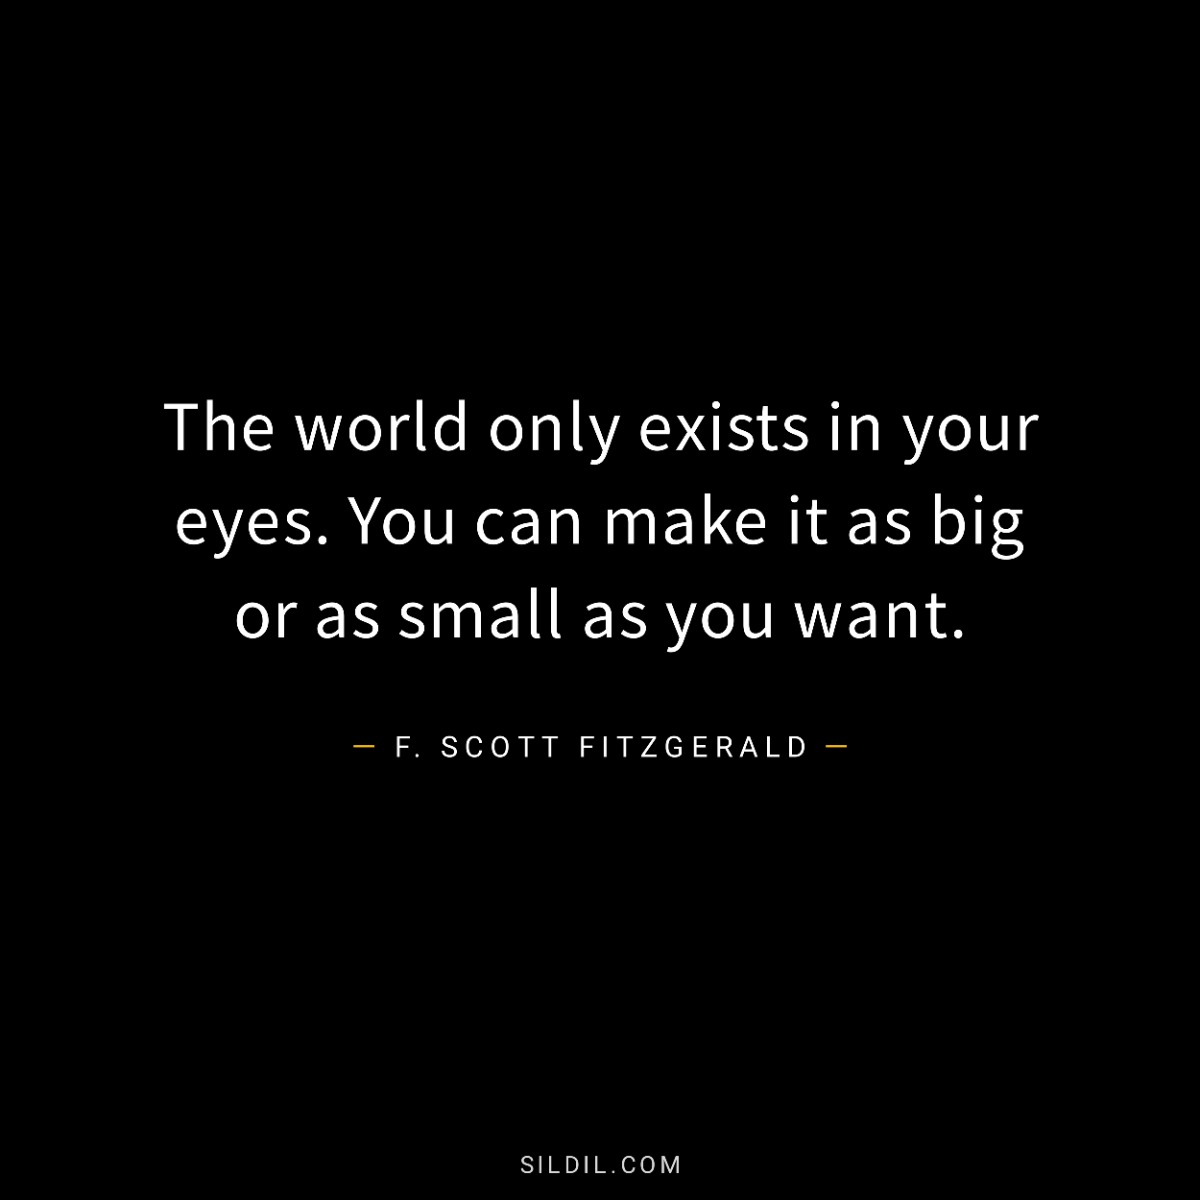 The world only exists in your eyes. You can make it as big or as small as you want.